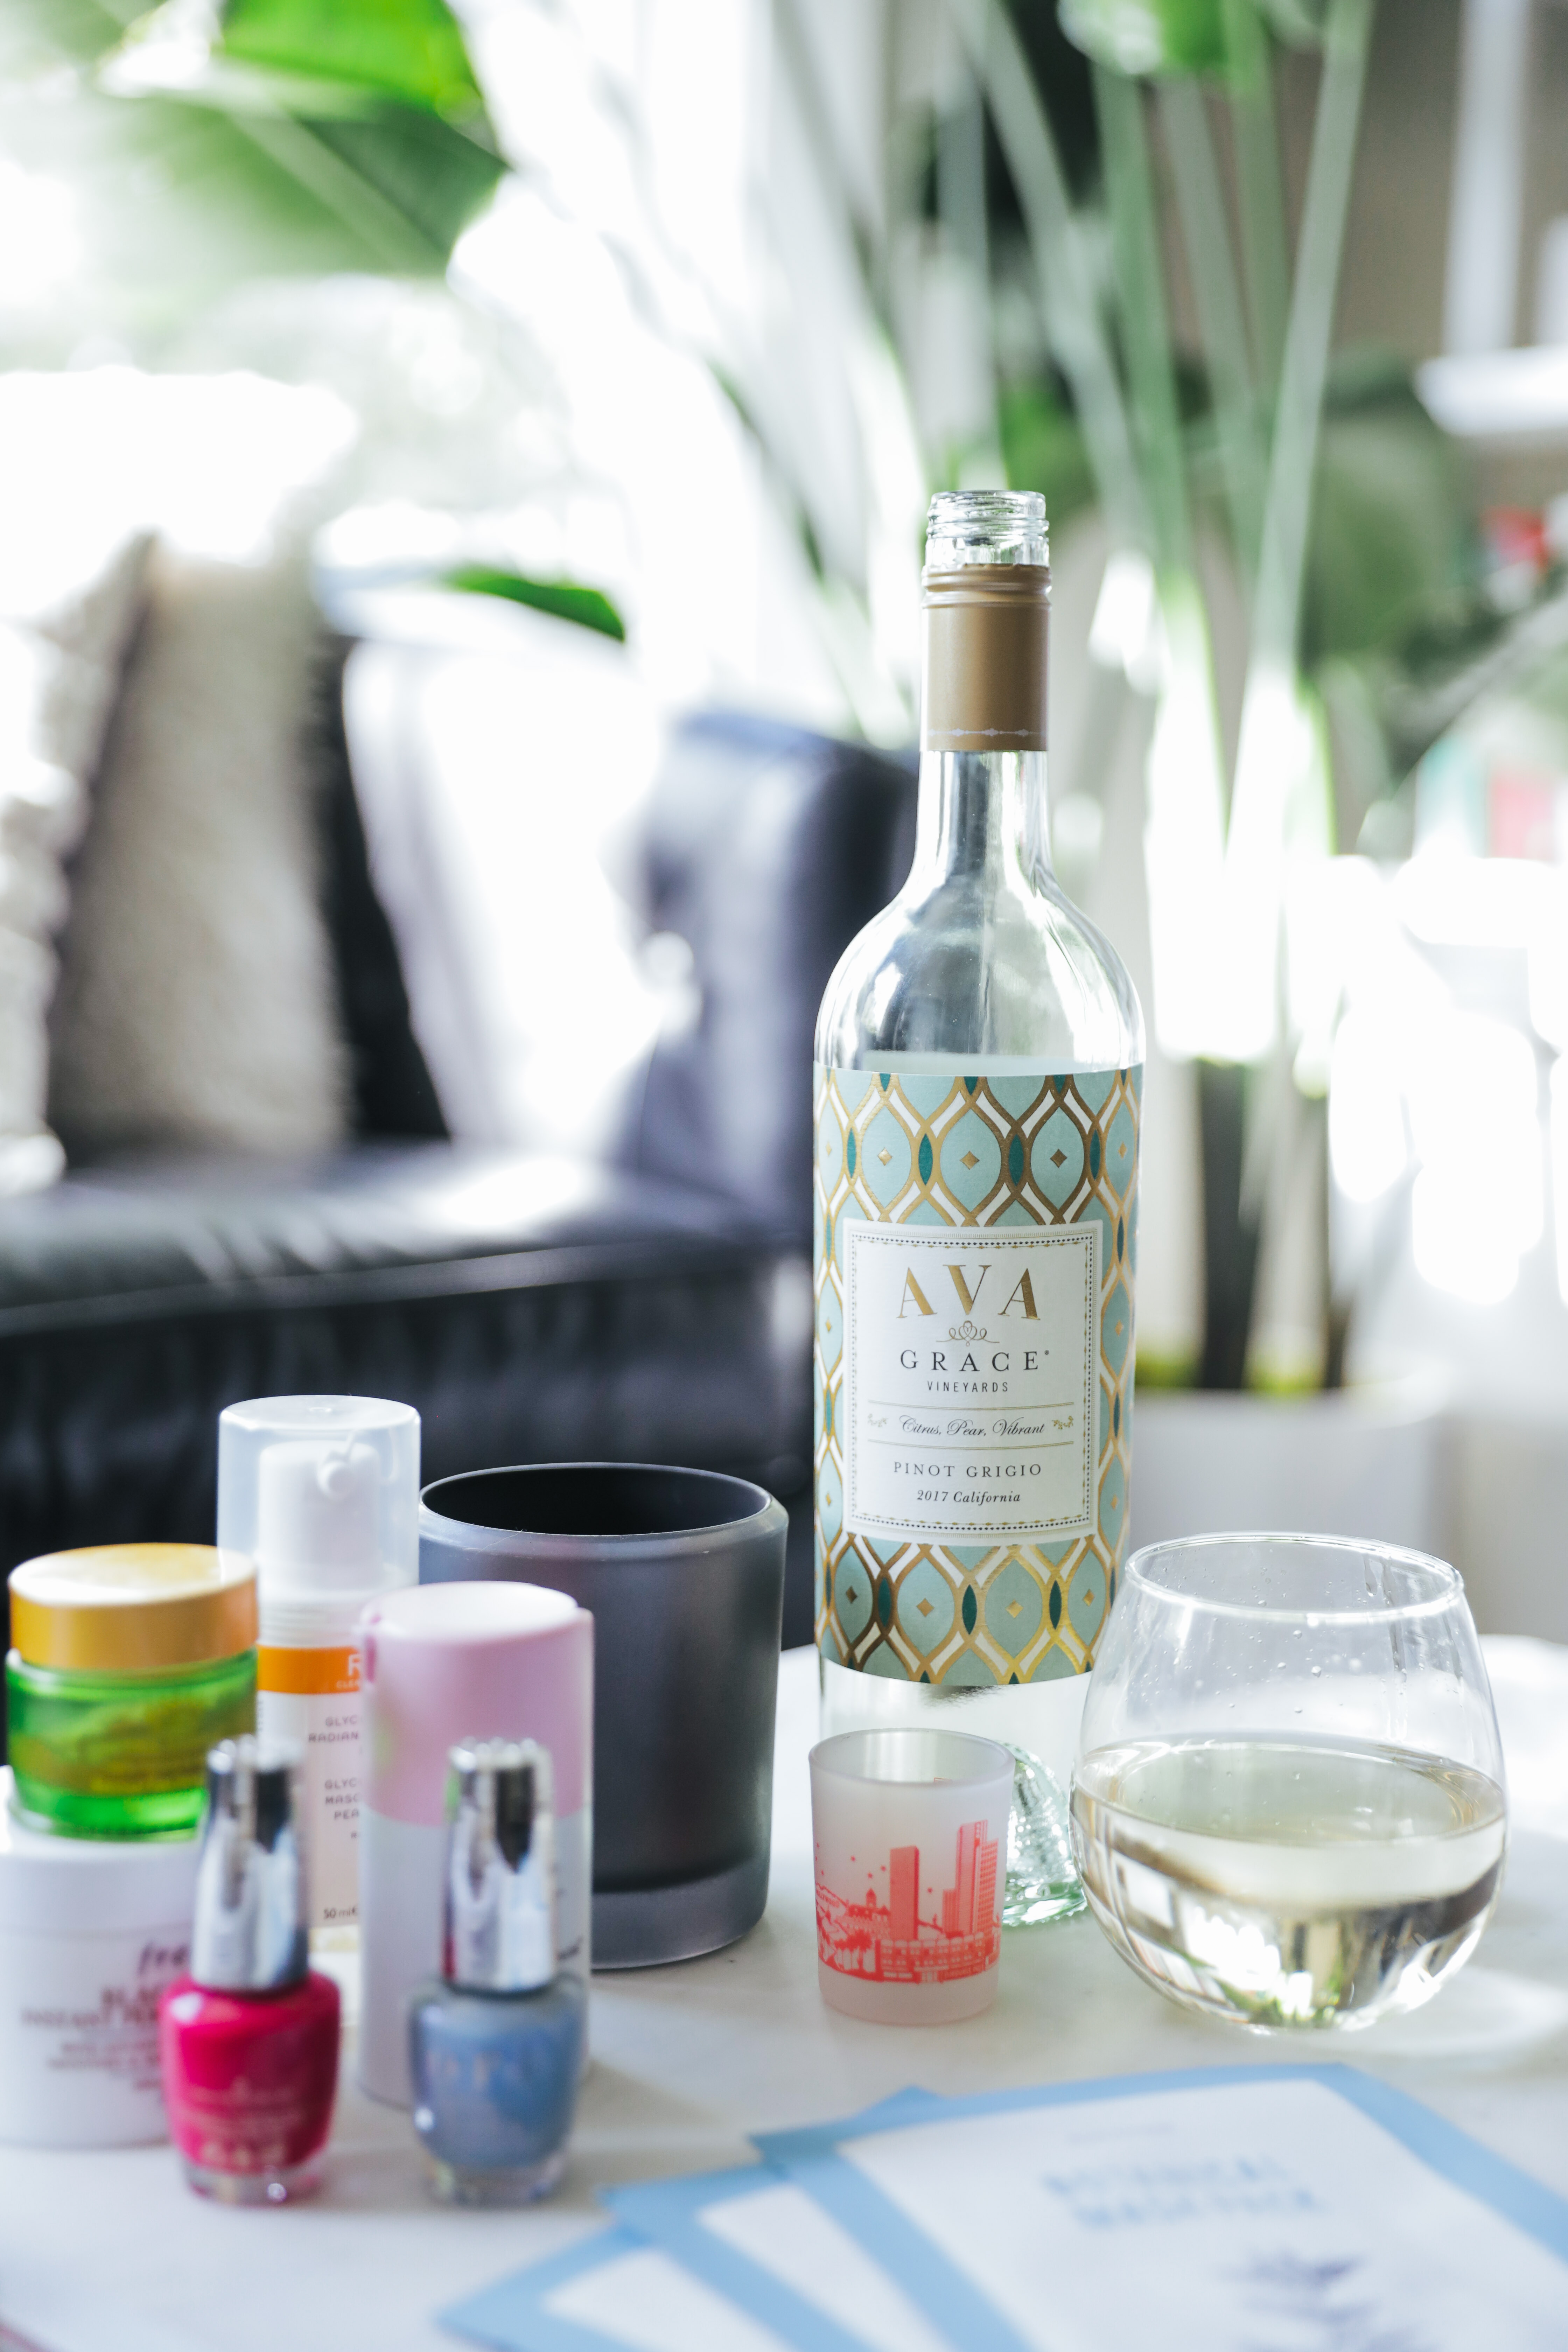 How To Host An At Home Spa Night with AVA Grace wine.